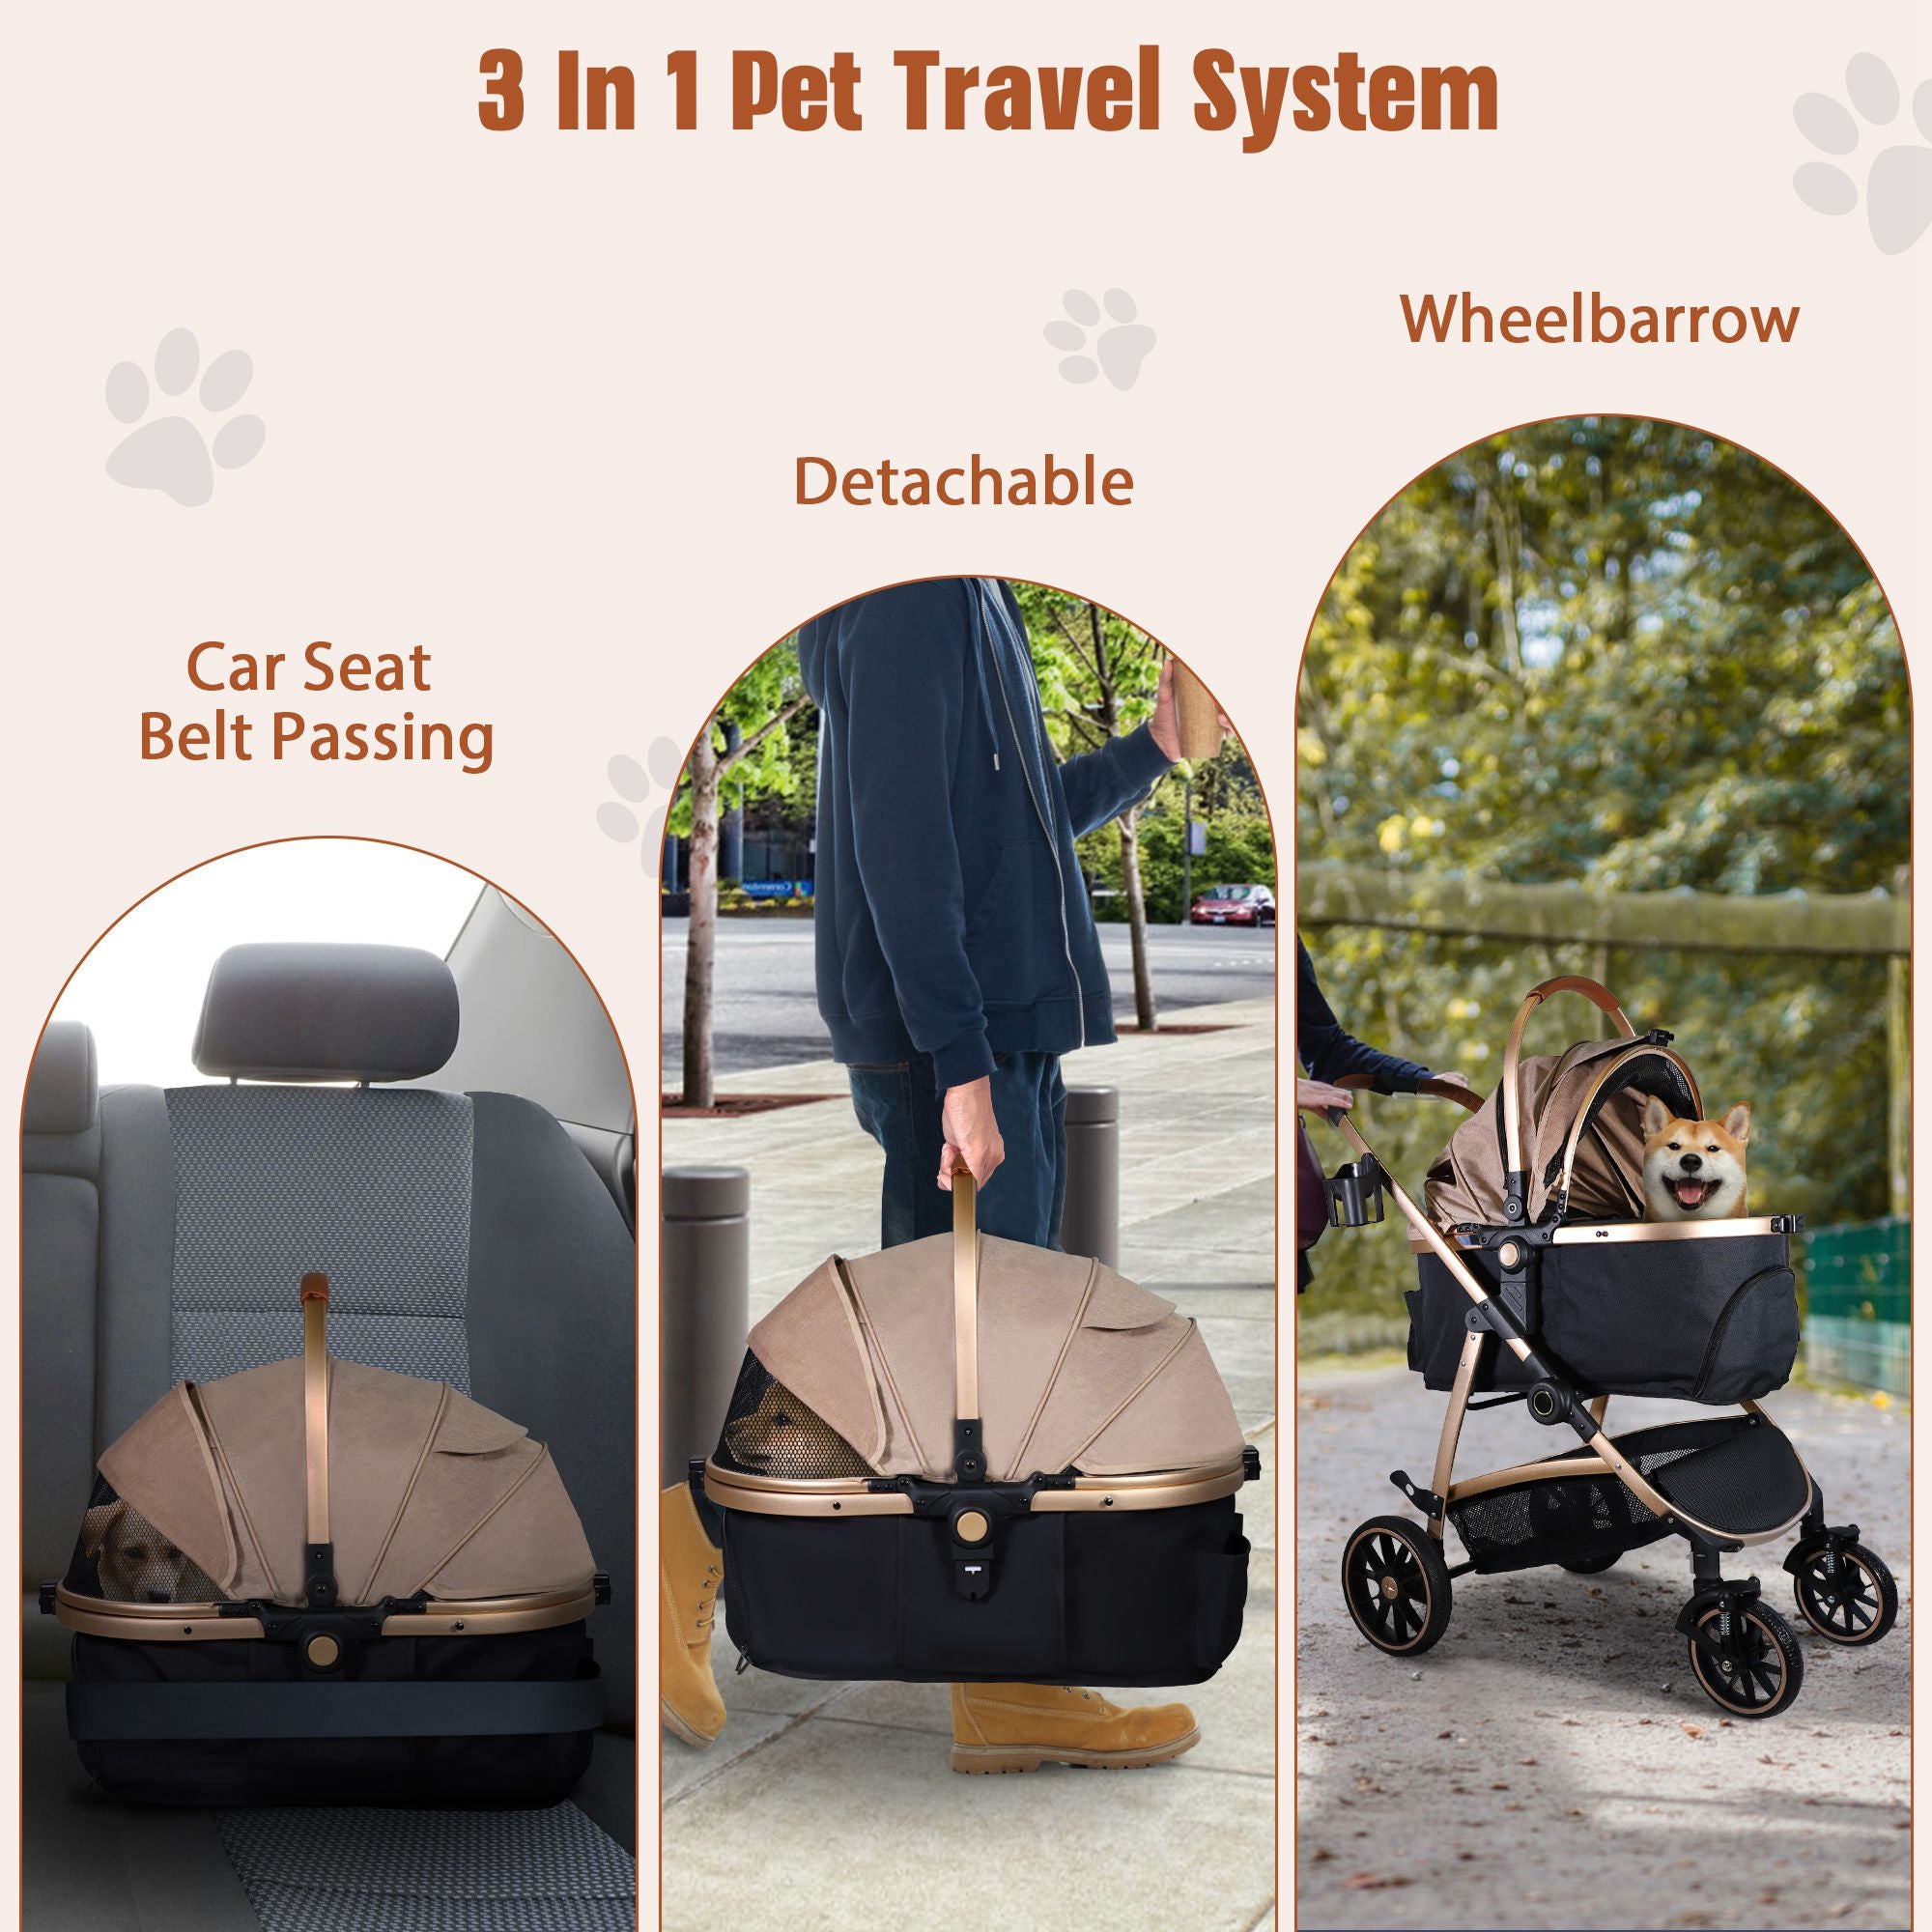 3 in 1 Foldable Aluminum Alloy Frame Pet Stroller No-Zip Dog Stroller with Detachable Carrier & Cup Holder, Up to 33 lbs, Gold